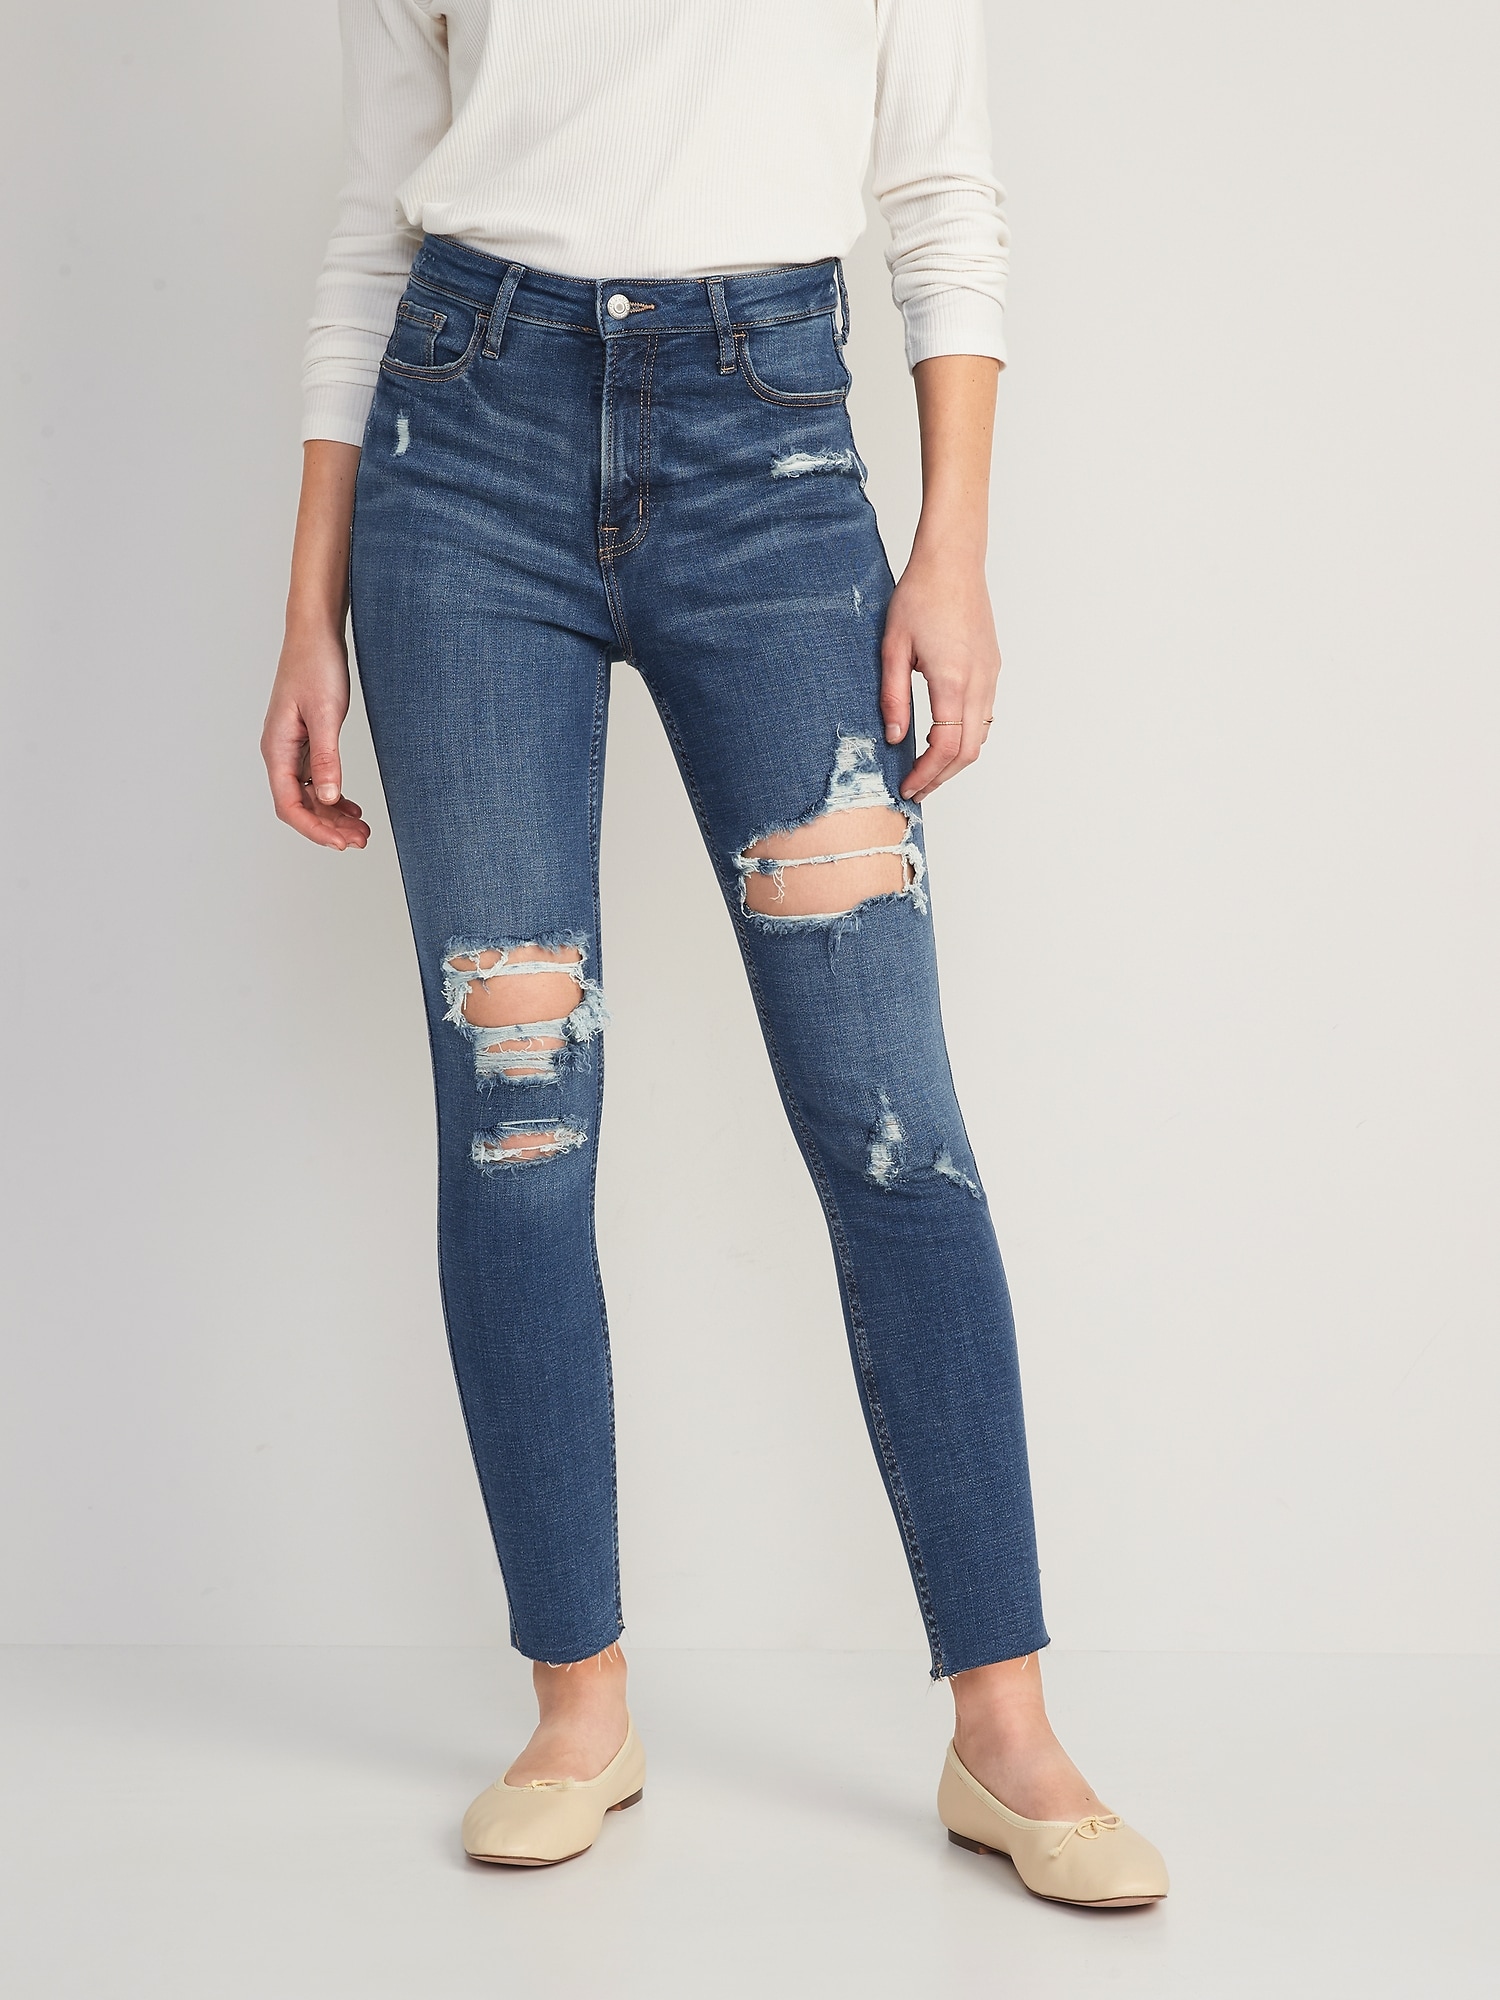 Extra High-Waisted Rockstar 360° Ripped Jeans for Women Old Navy